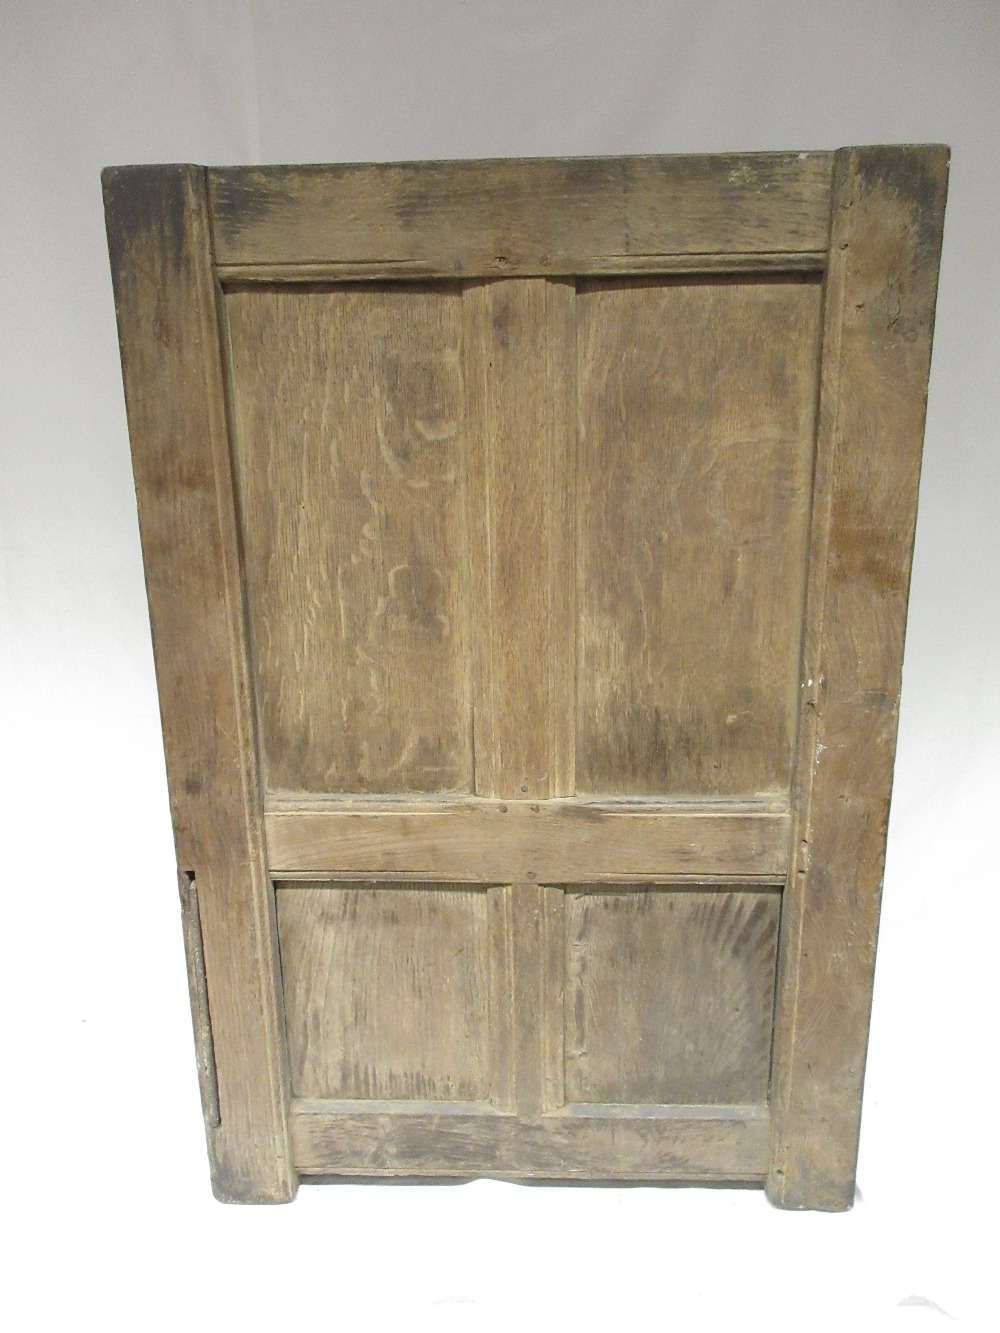 19th century oak box seat chair, panel back and seat cover, frame carved with Celtic strapwork, - Image 3 of 3